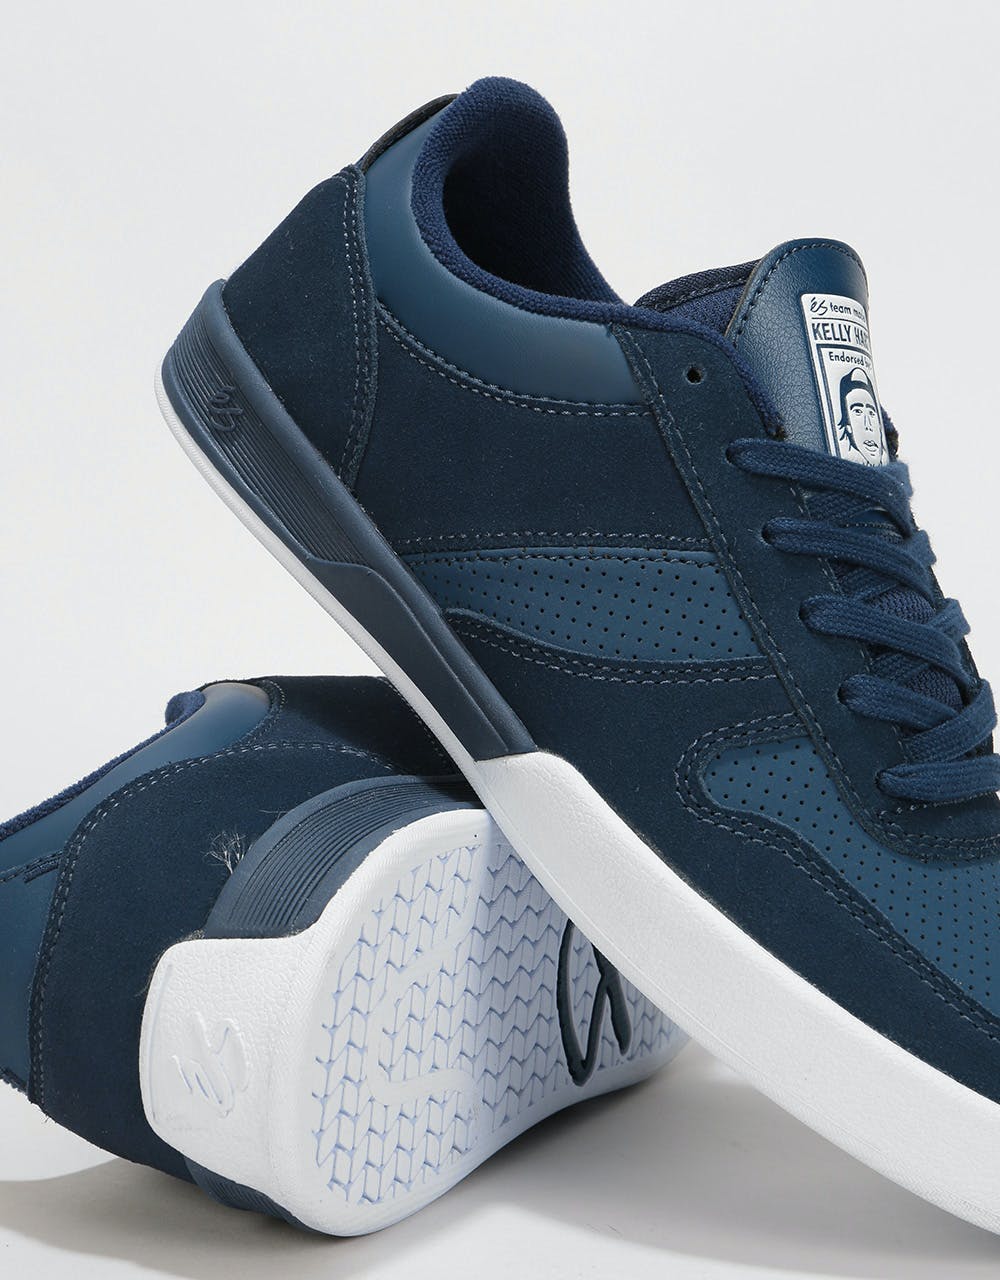 éS Contract Skate Shoes - Navy/White